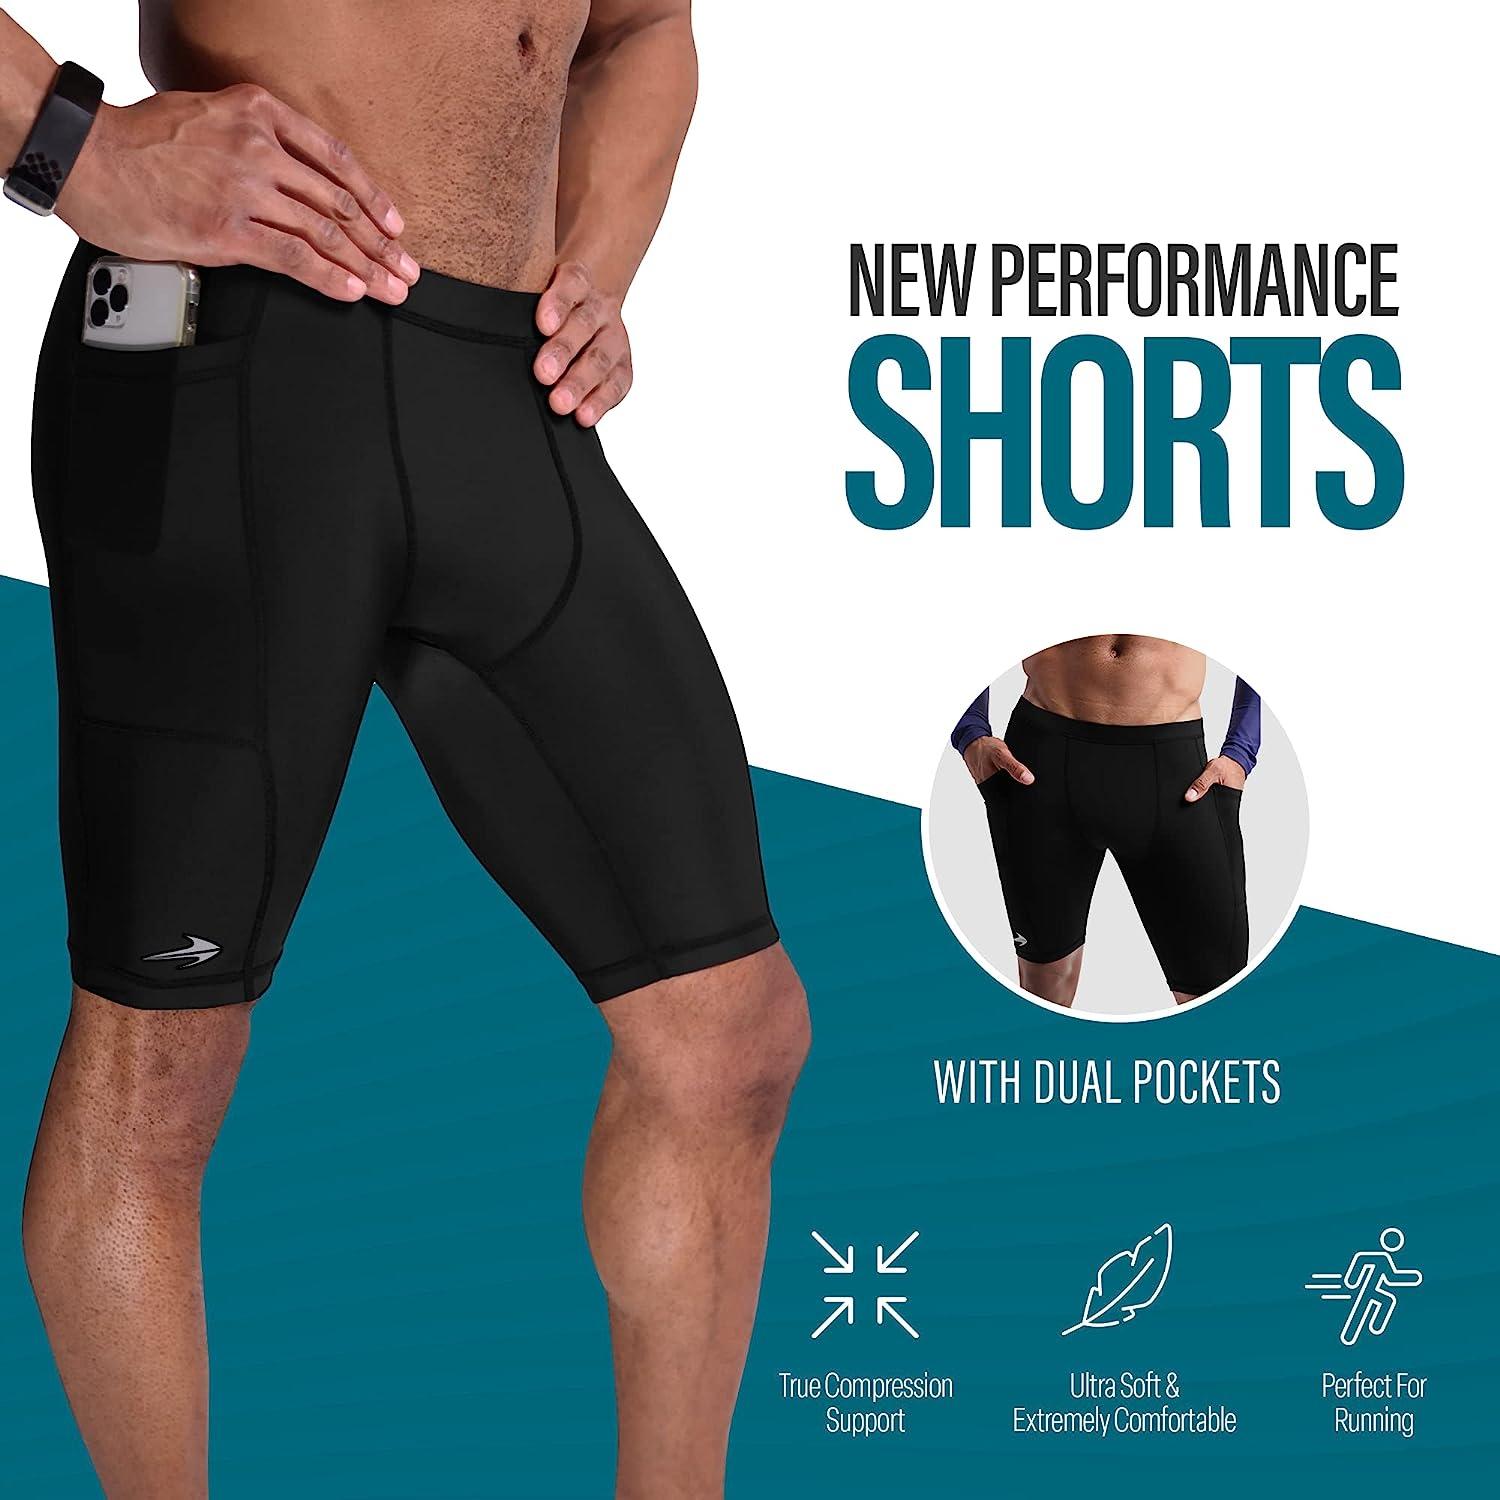 Extra High-Waisted Firm Compression Shorts - Sleep & Lingerie